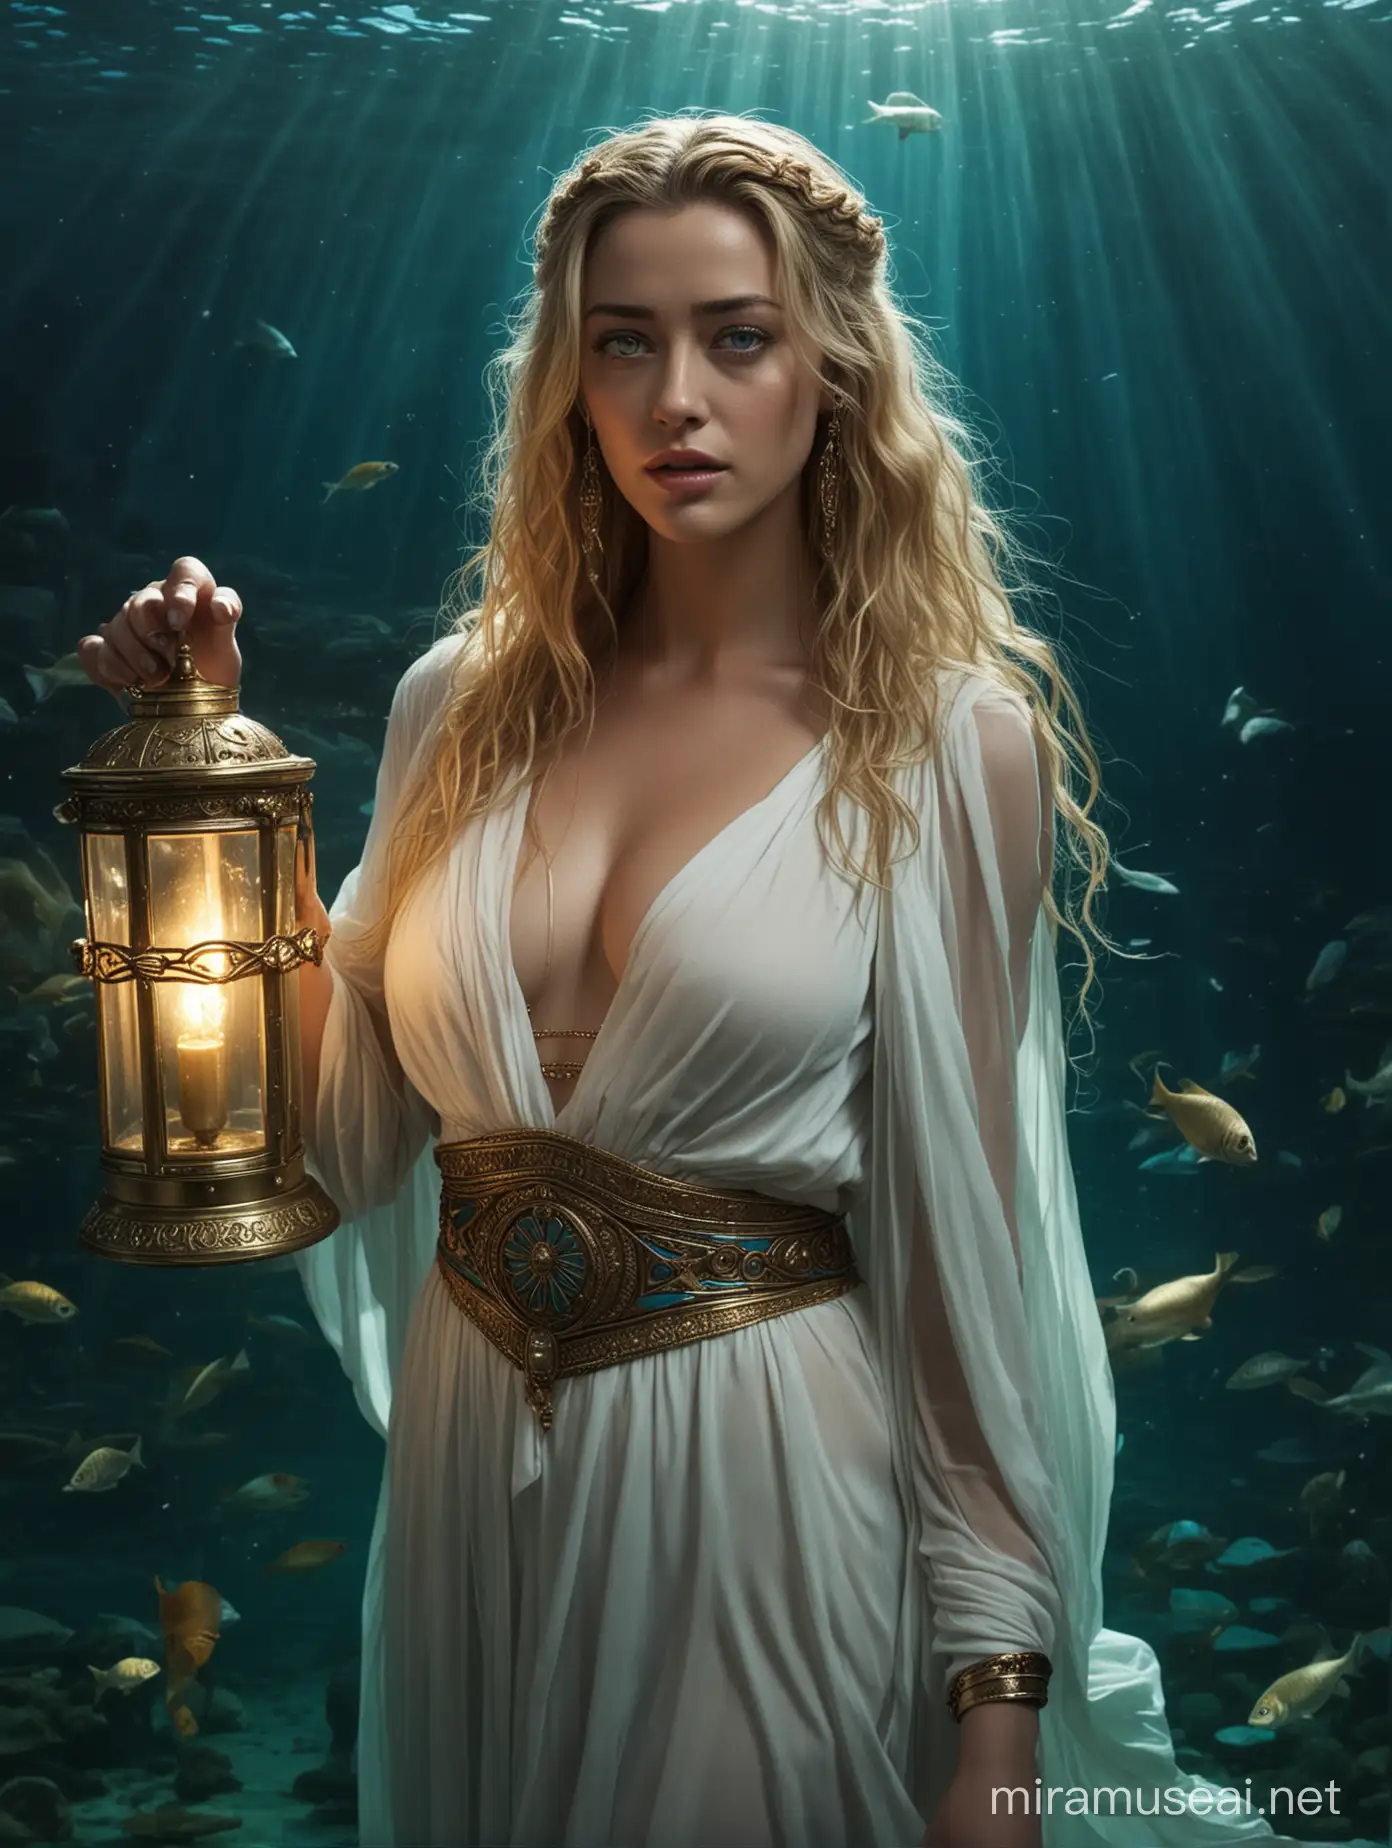 A masterpieced of Amber Heard as Isis, Egyptian goddess of the sea. She is under the sea, and her transluced Greek dress flows ethereally in the water until it mixes with the water until it disappears. She has has blue eyes and blonde hair. She is holding a lamp that contrasts with its brightness in the dark waters.